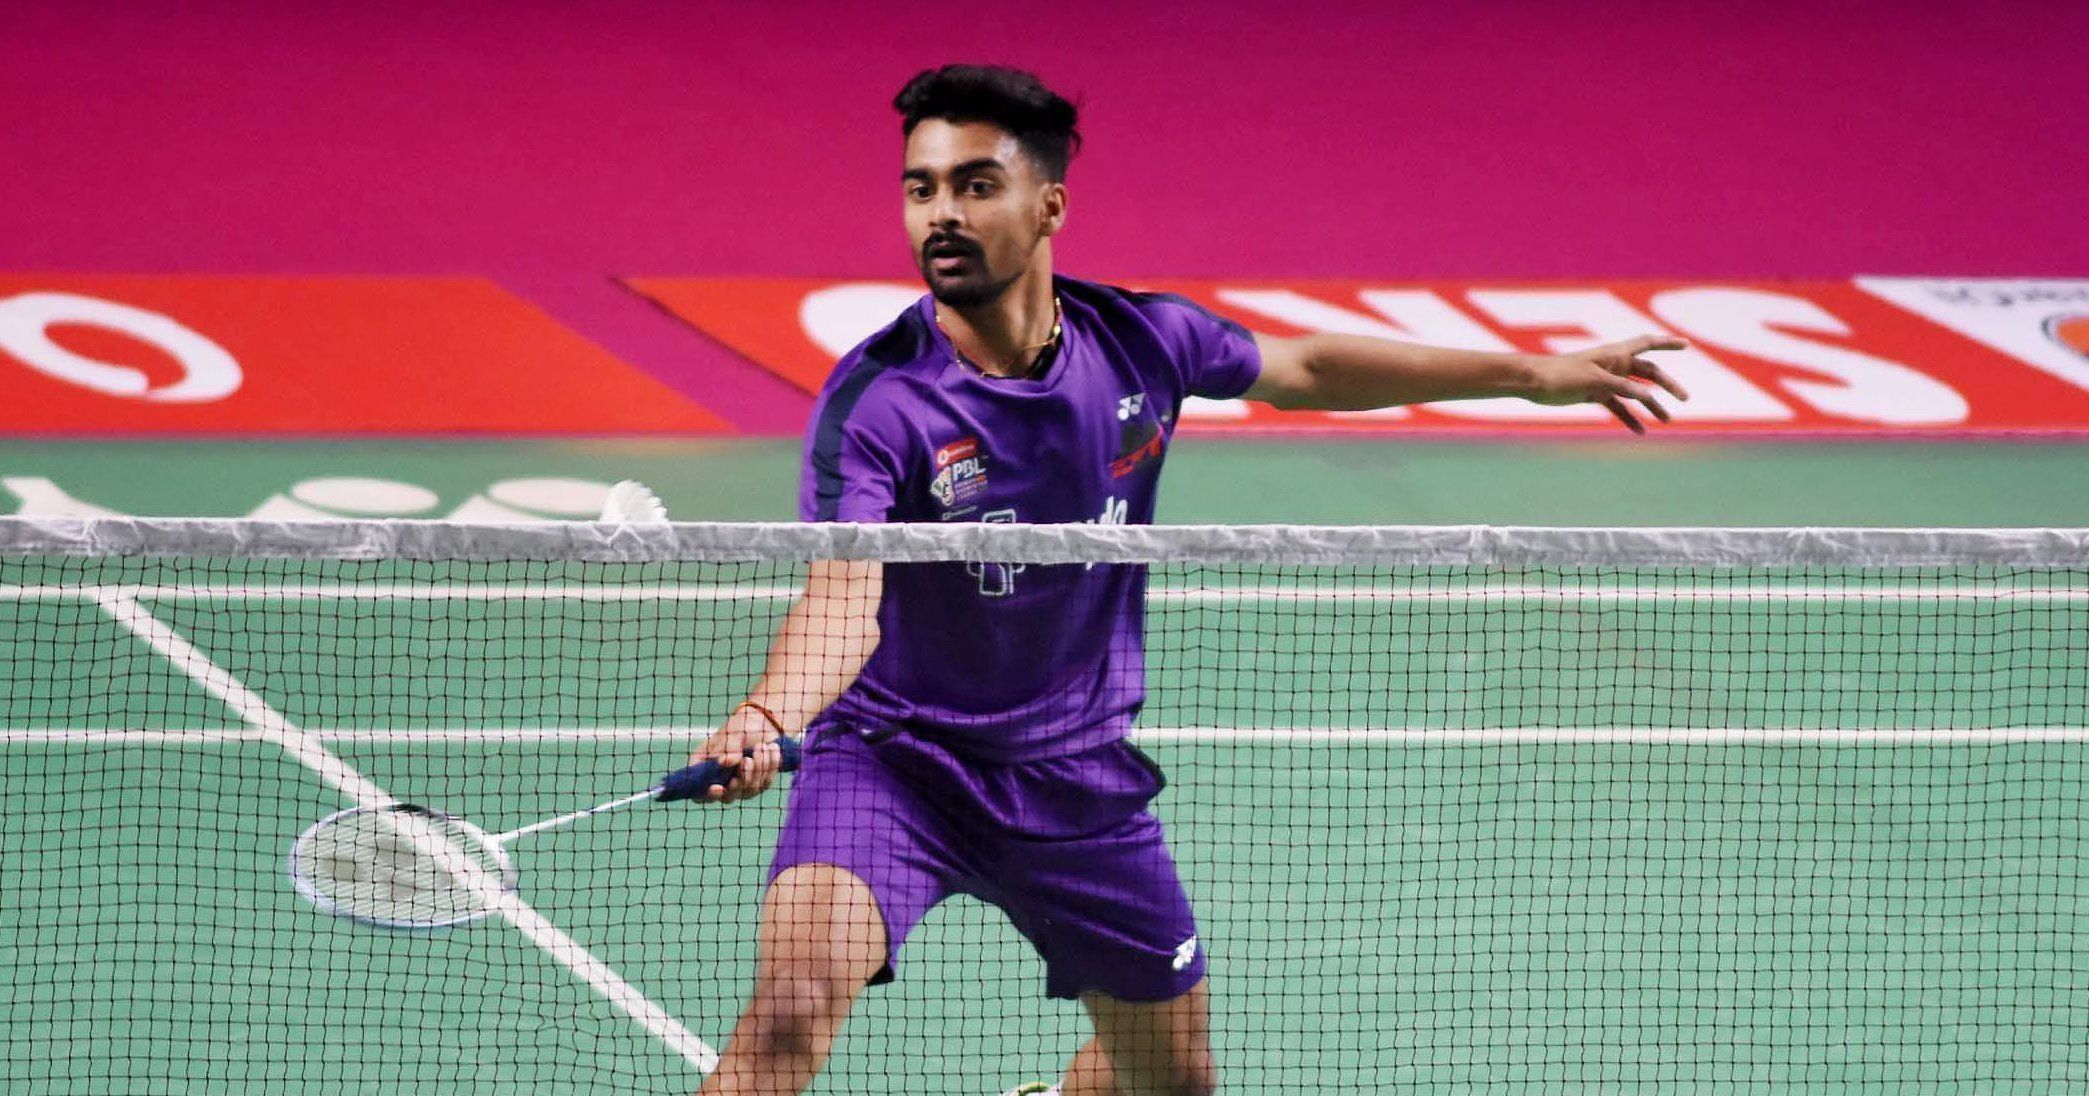 Sameer Verma Clinches Syed Modi International Title To Be India's